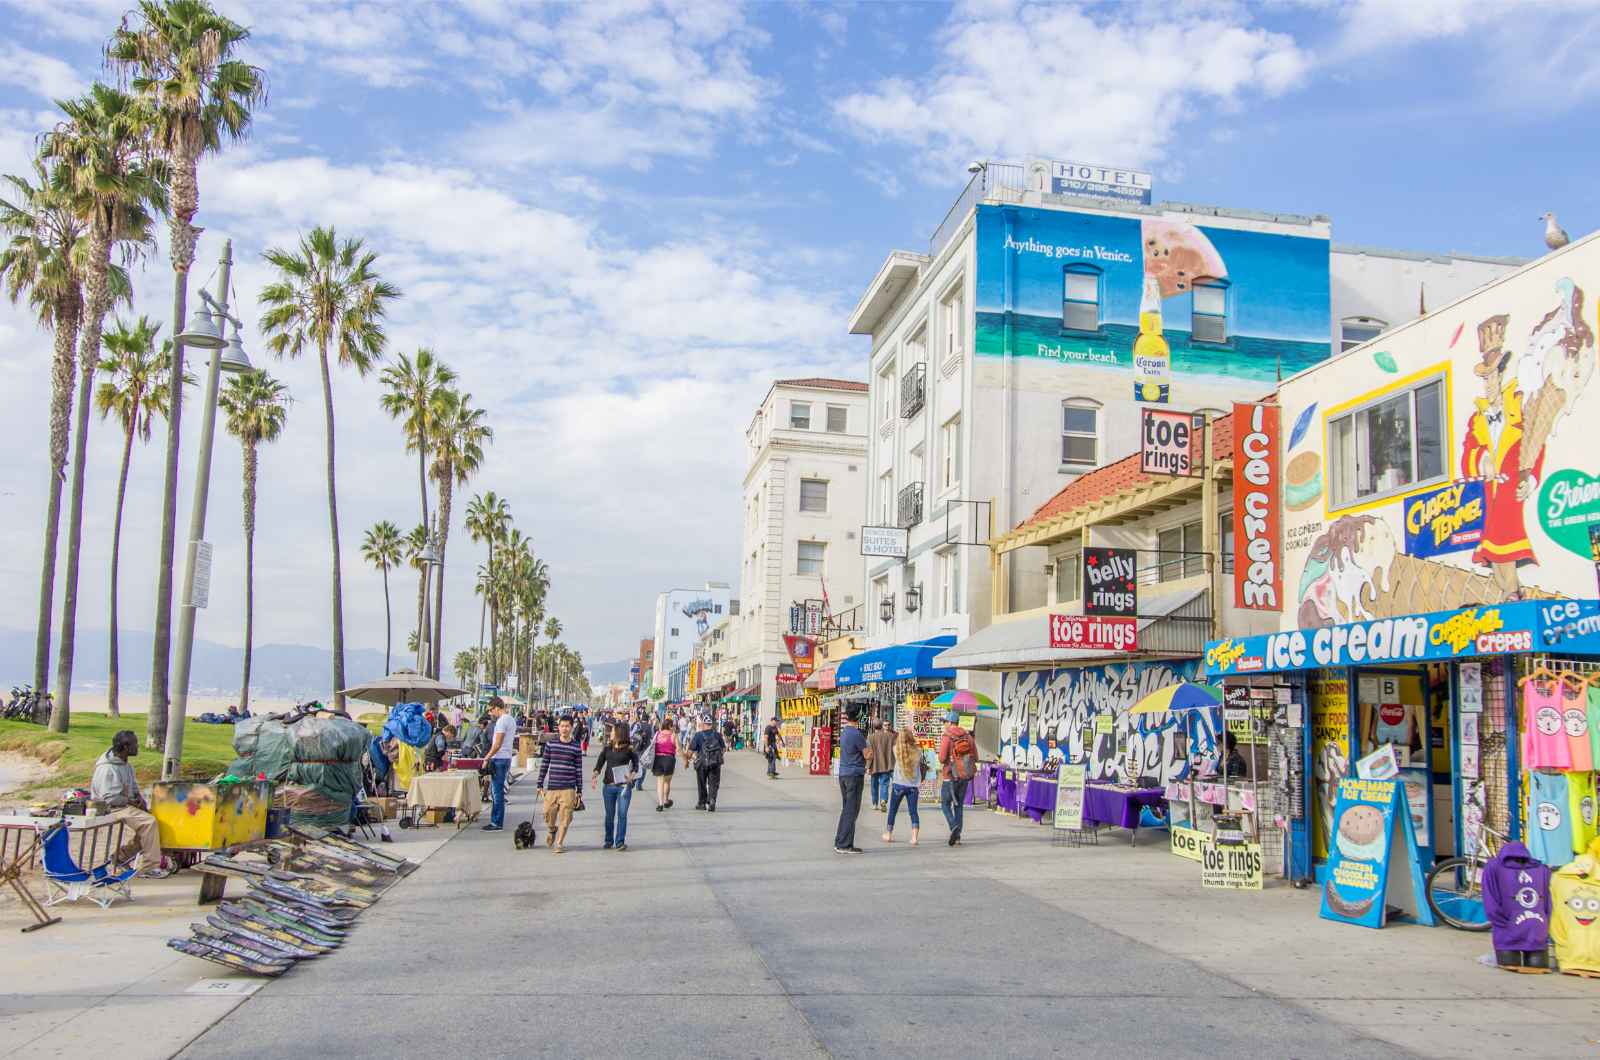 Best things to do in Venice beach